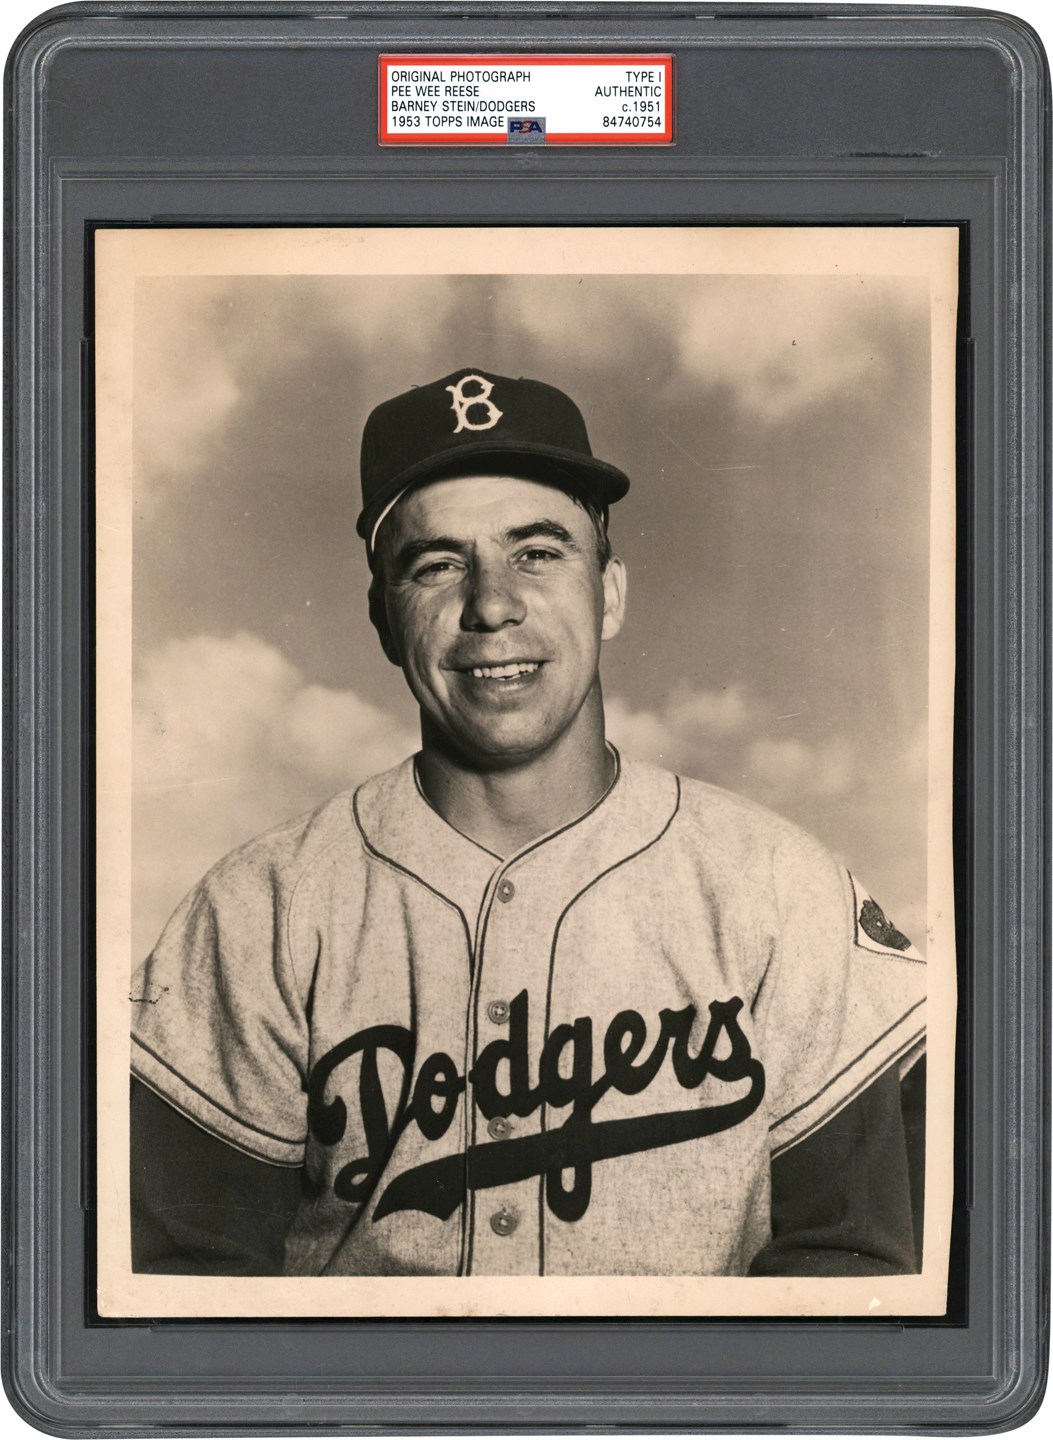 Vintage Sports Photographs - Pee Wee Reese Photograph Used for 1953 Topps Baseball Card (PSA Type I)